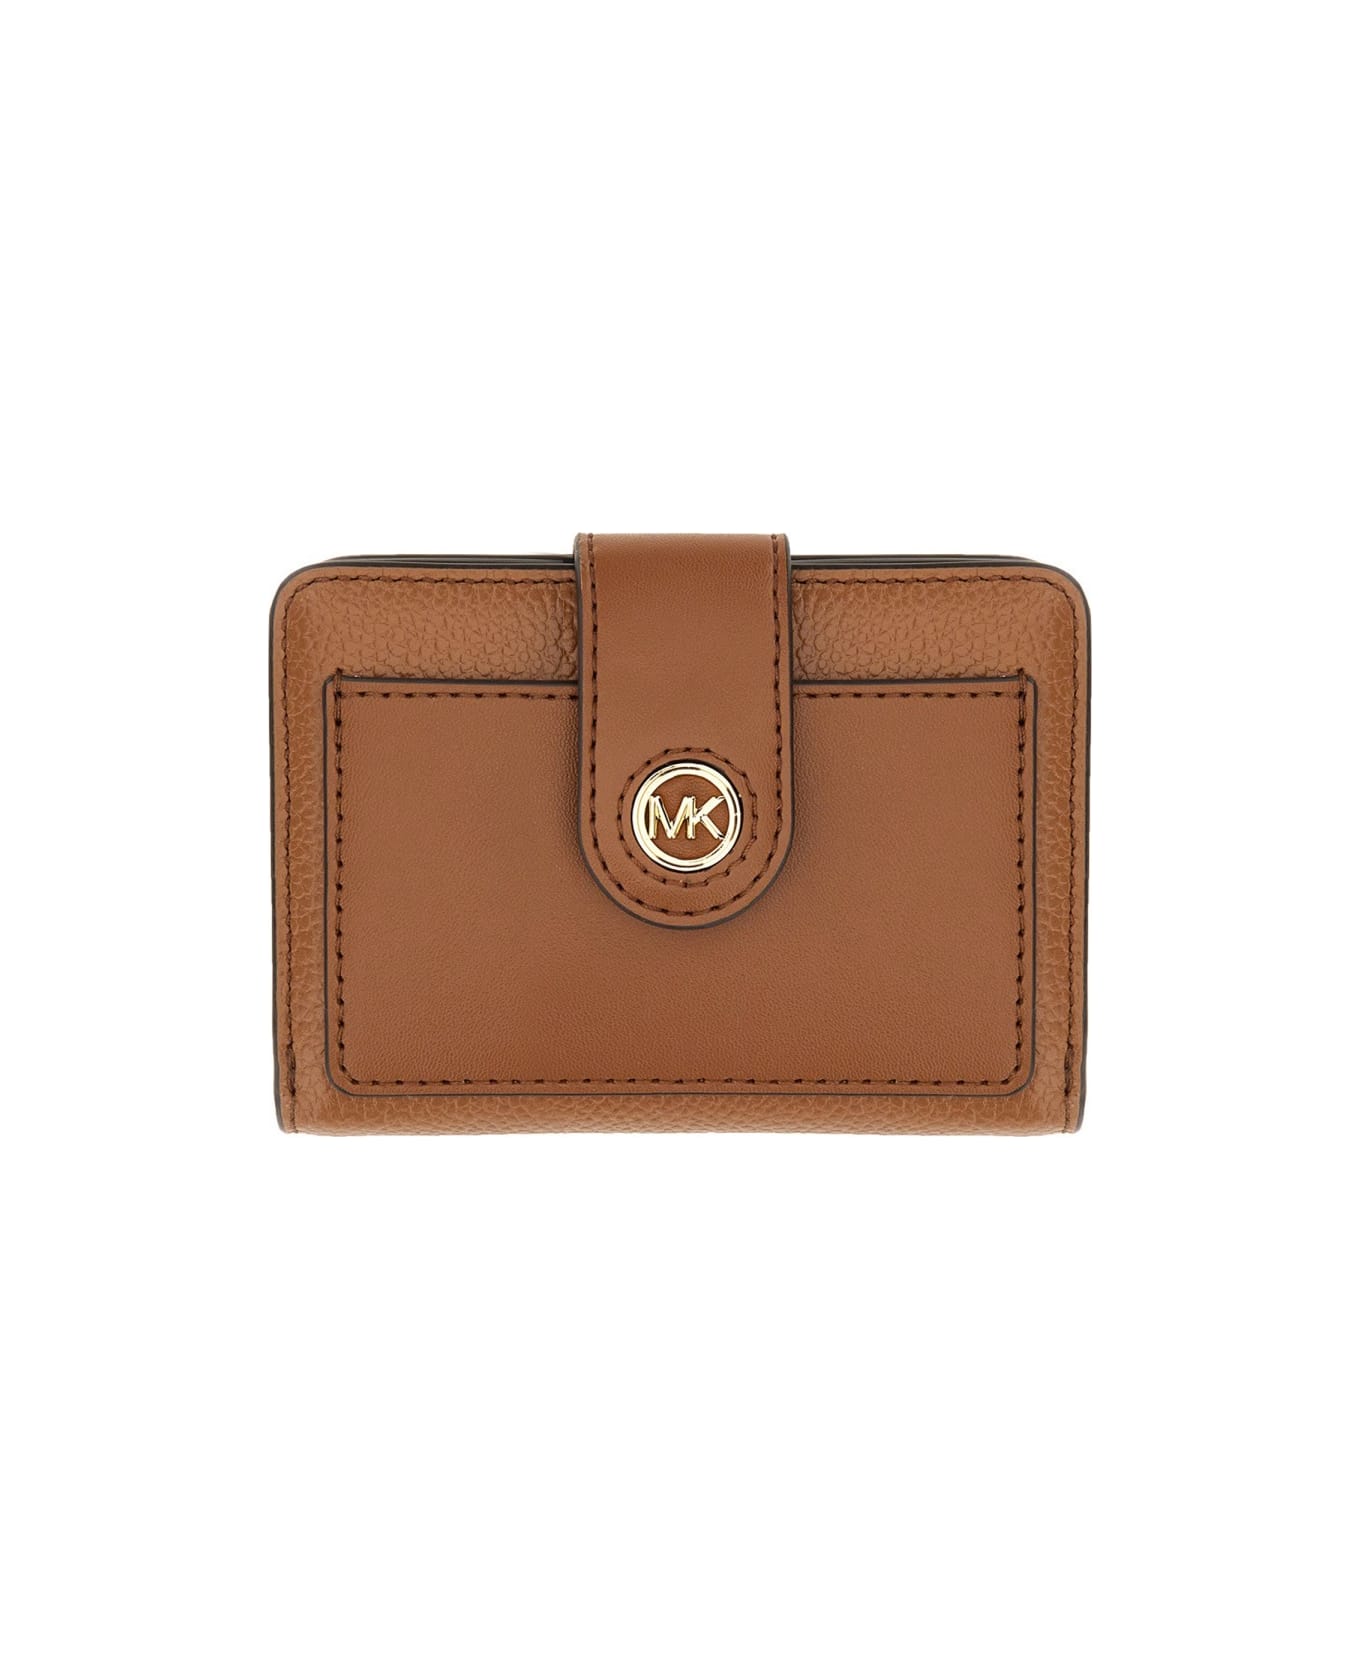 Michael Kors Compact Wallet With Logo - LUGGAGE